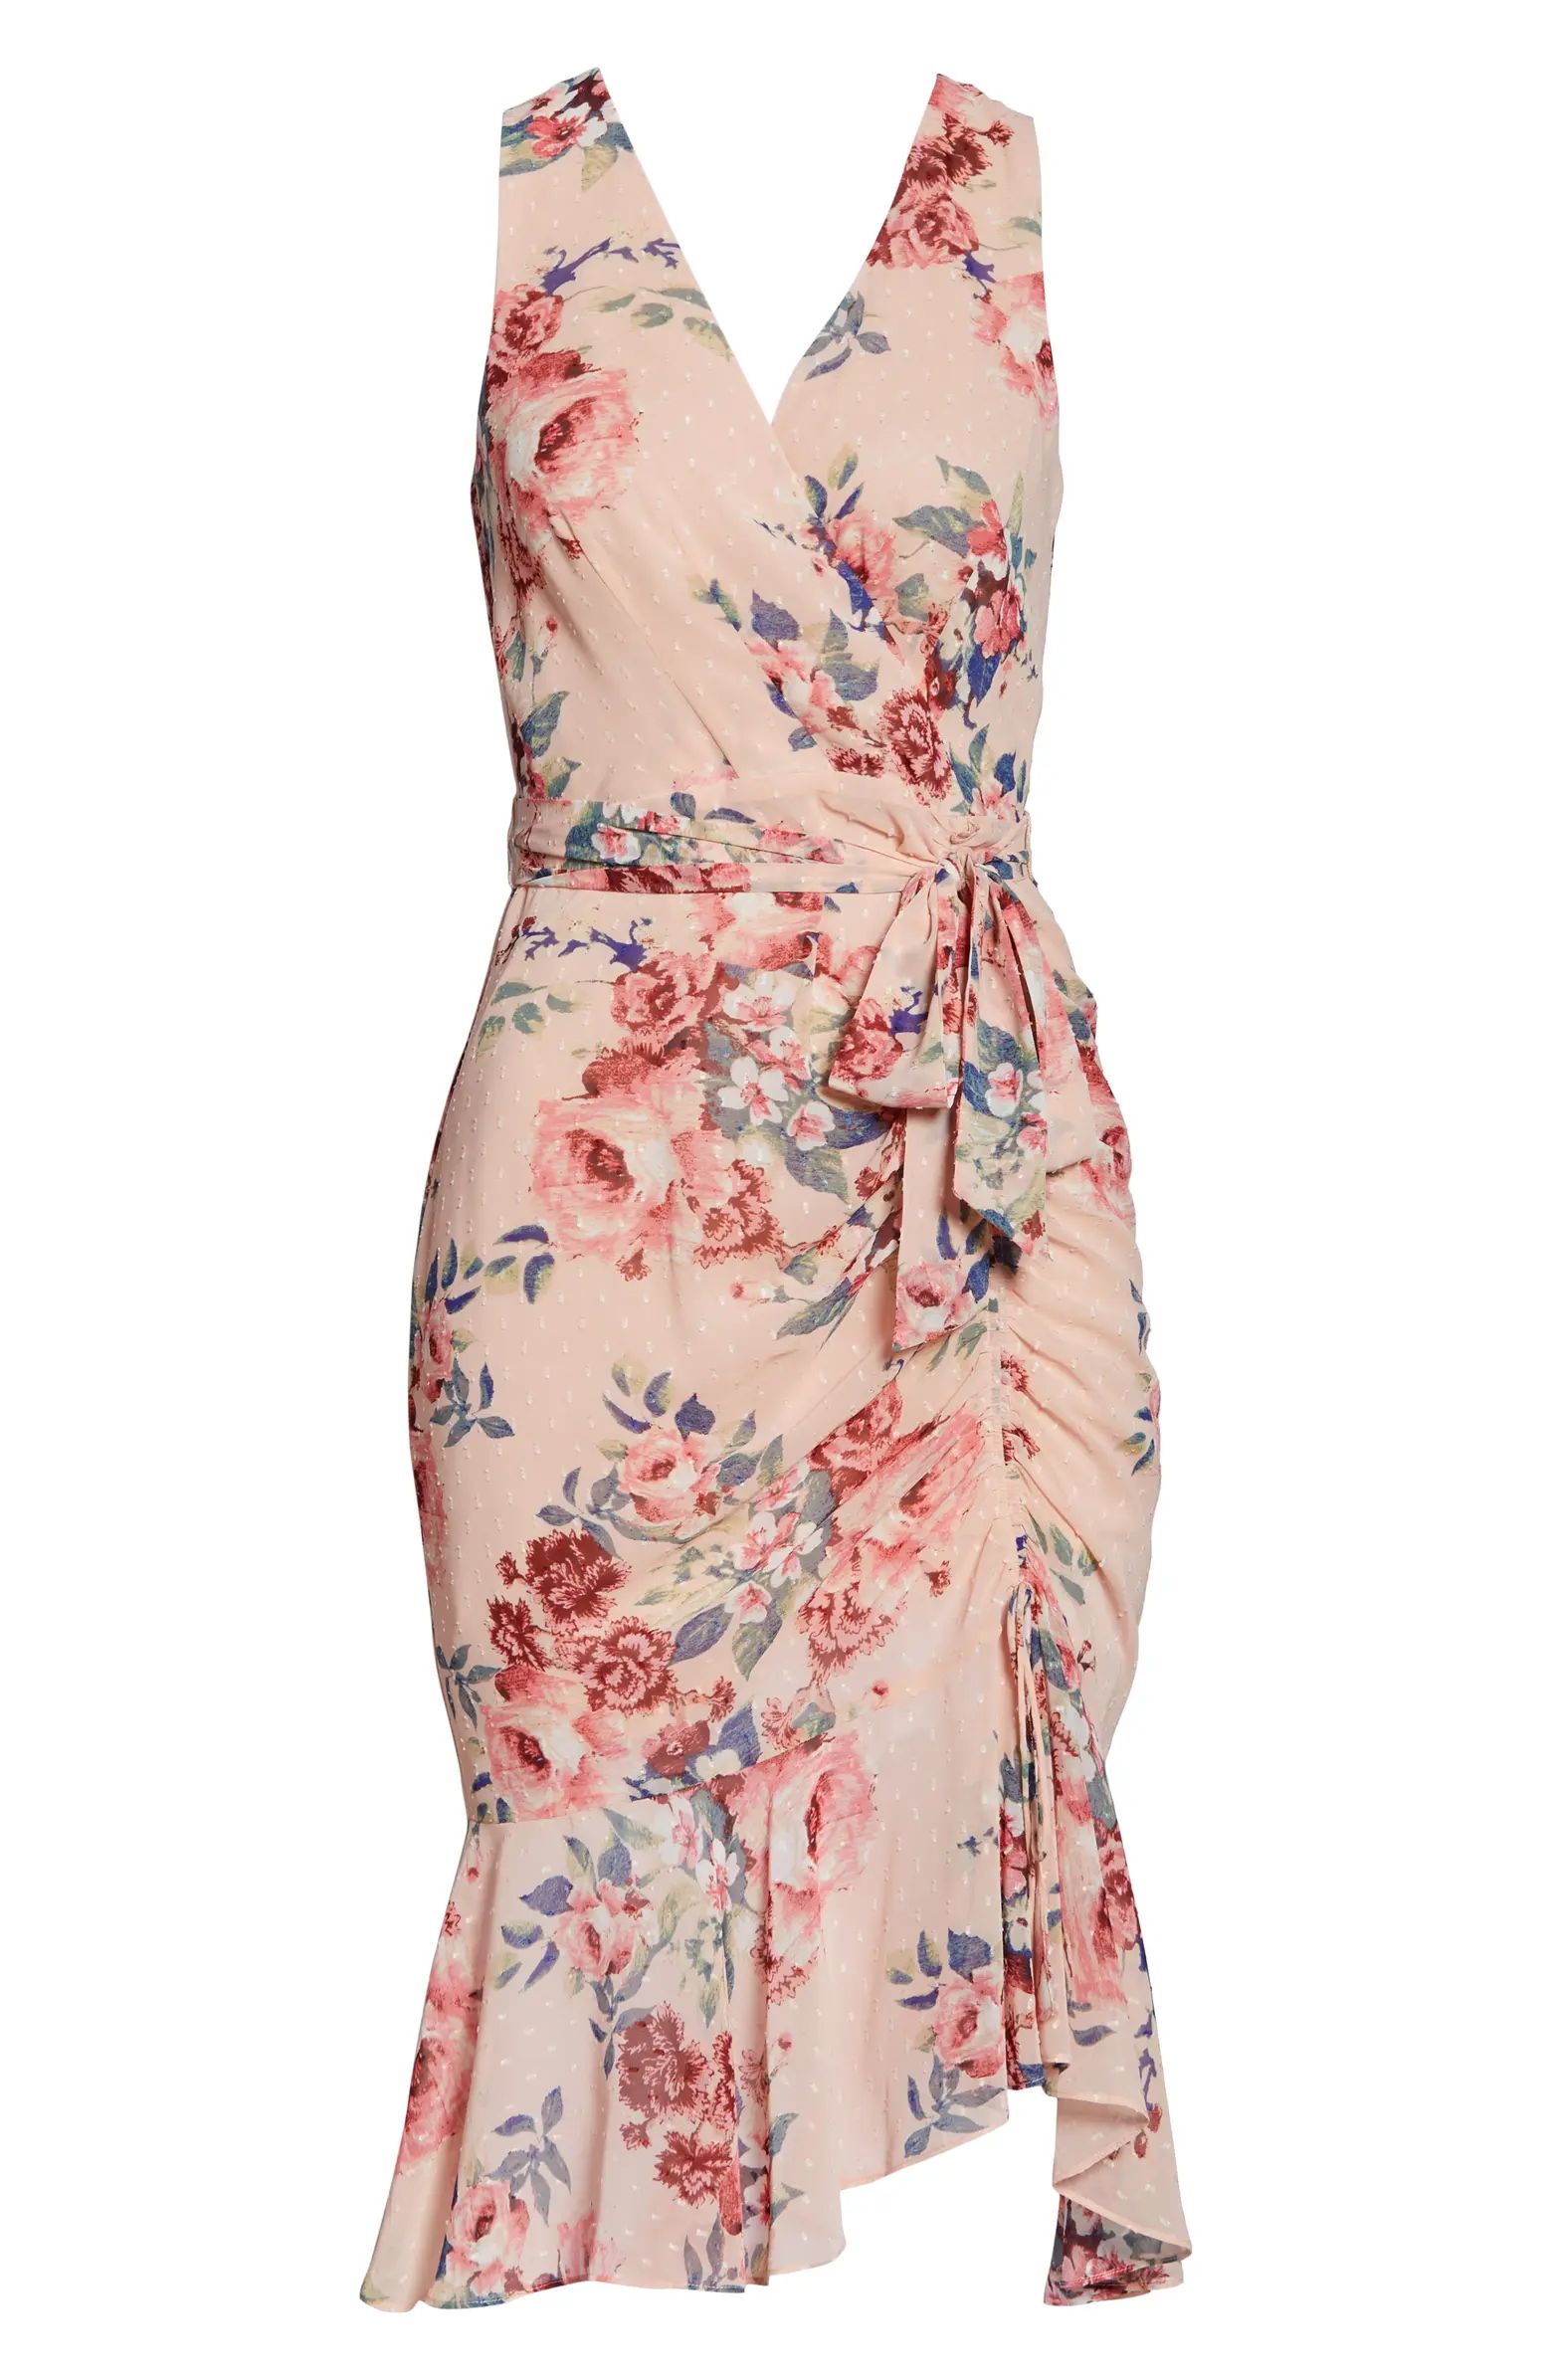 Floral Ruched Chiffon Faux Wrap Dress | Nordstrom